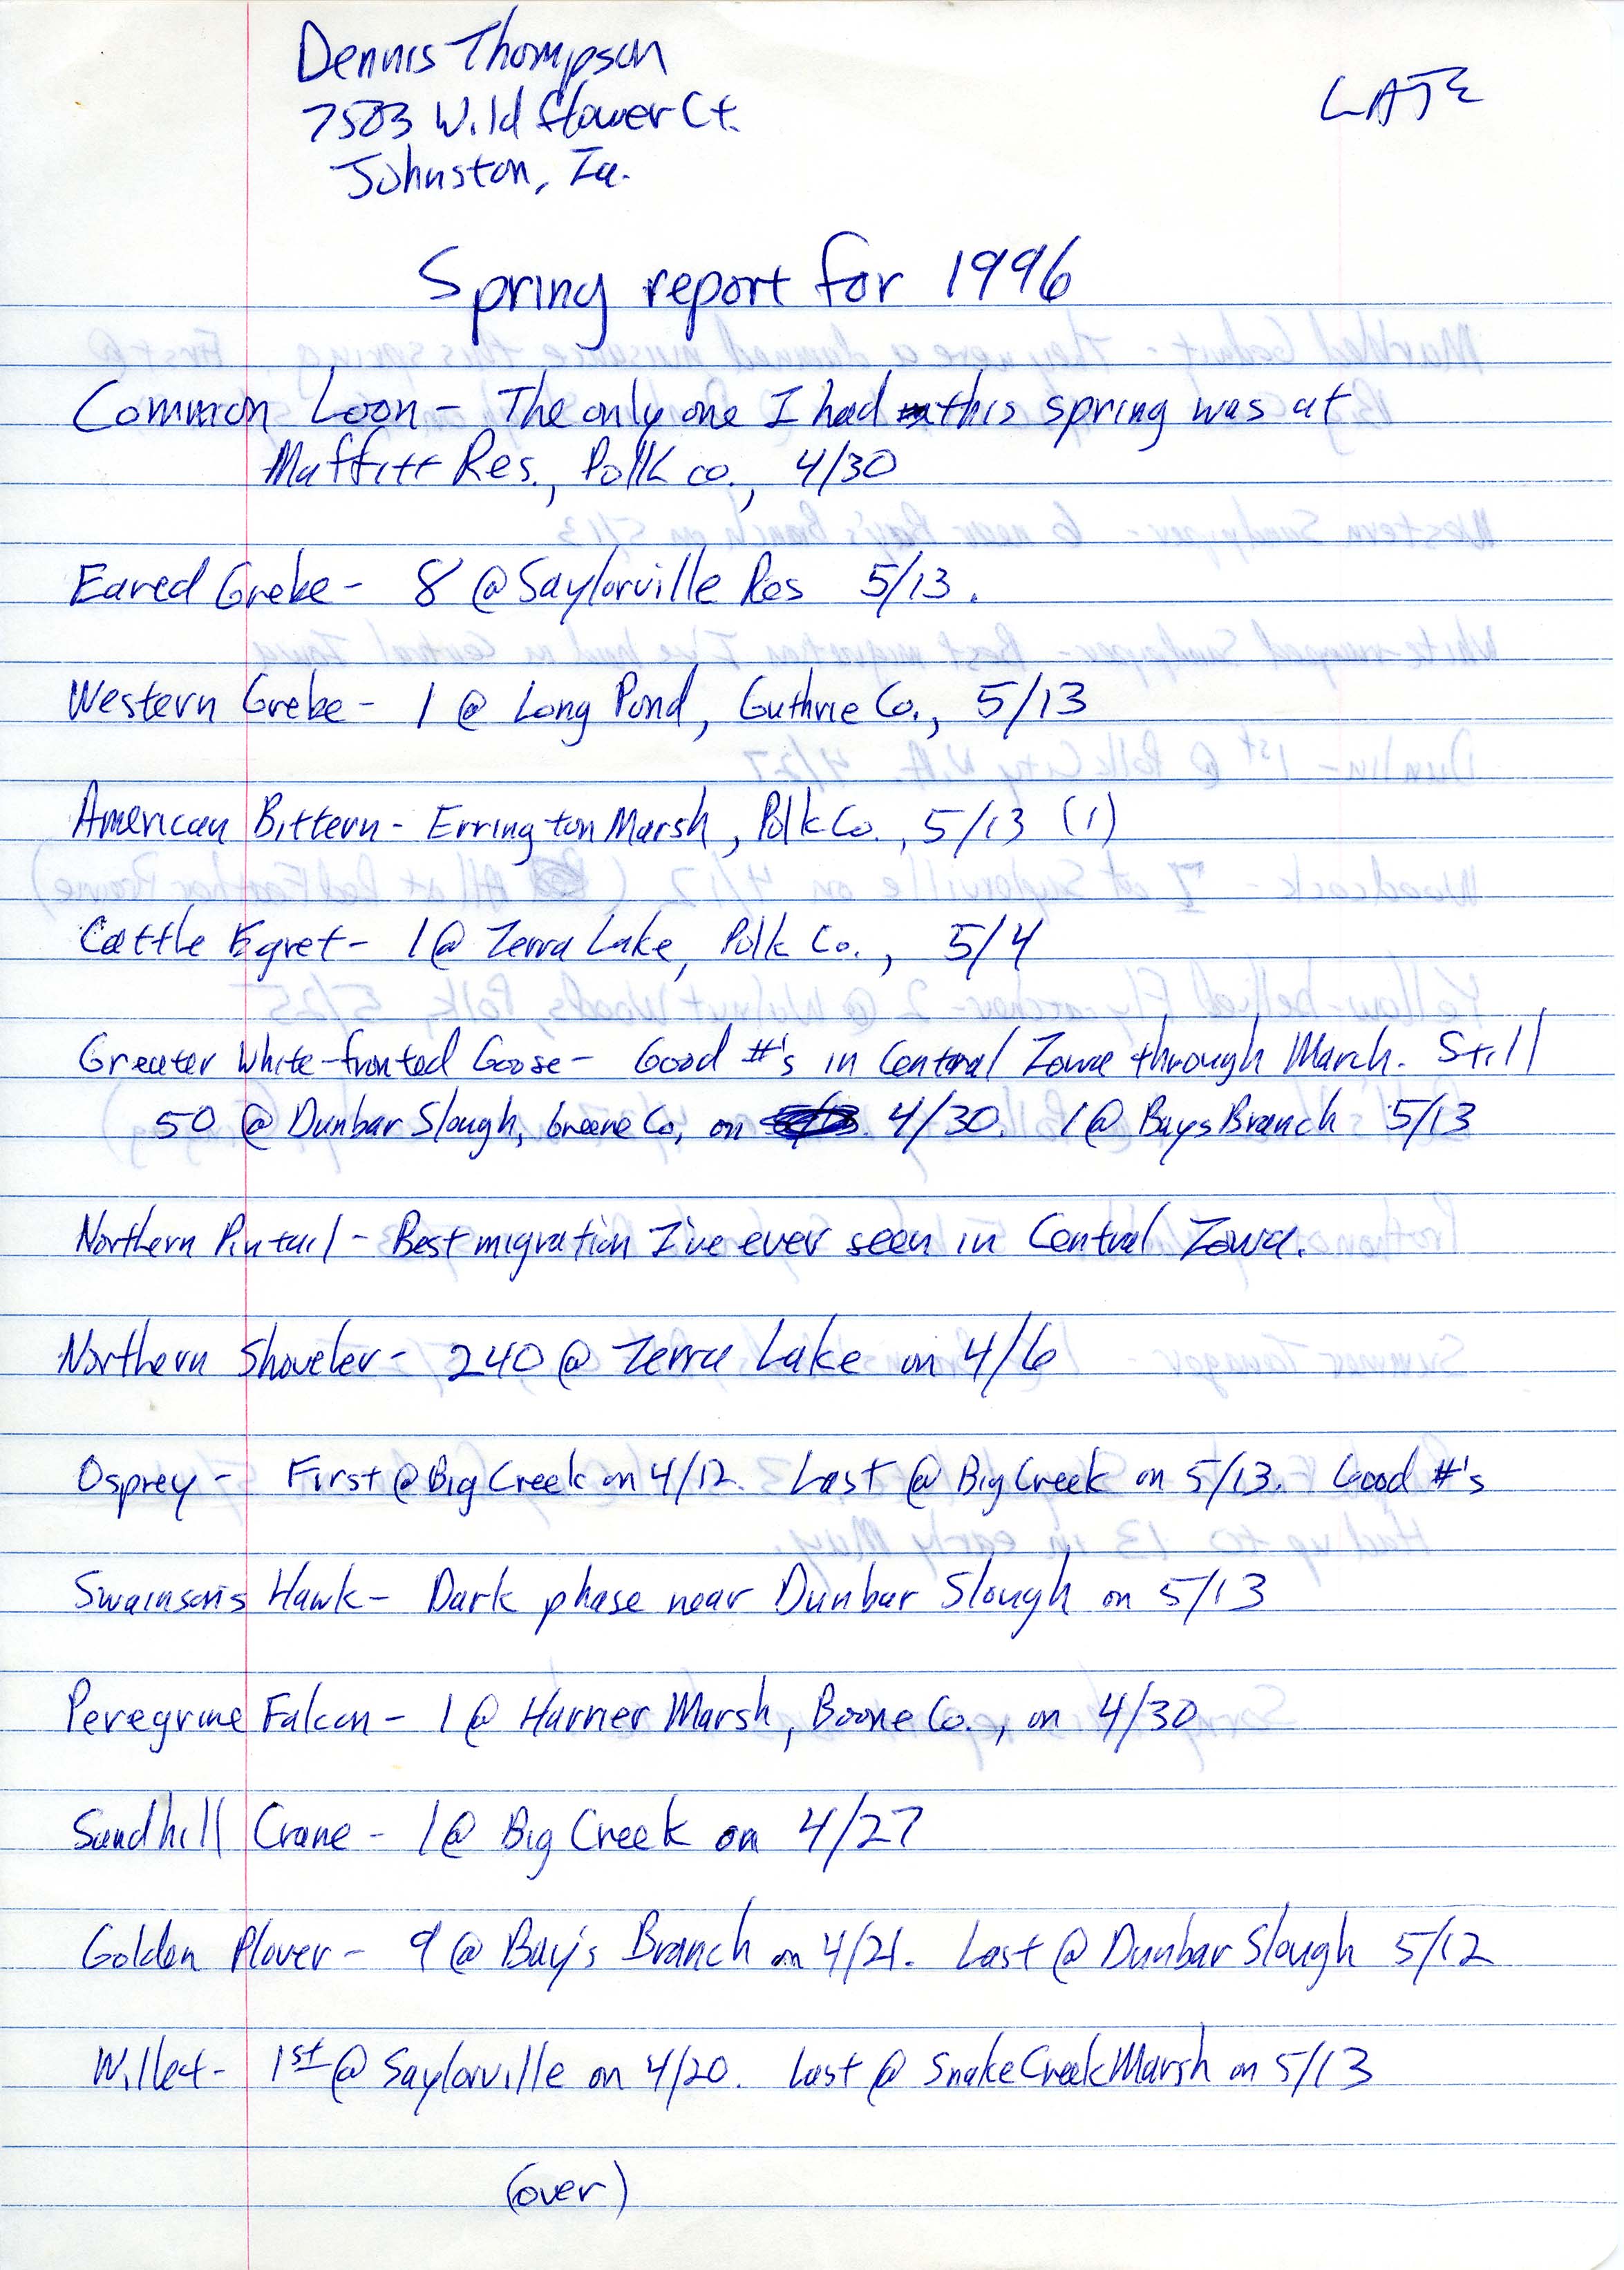 Field notes contributed by Dennis Thompson, spring 1996